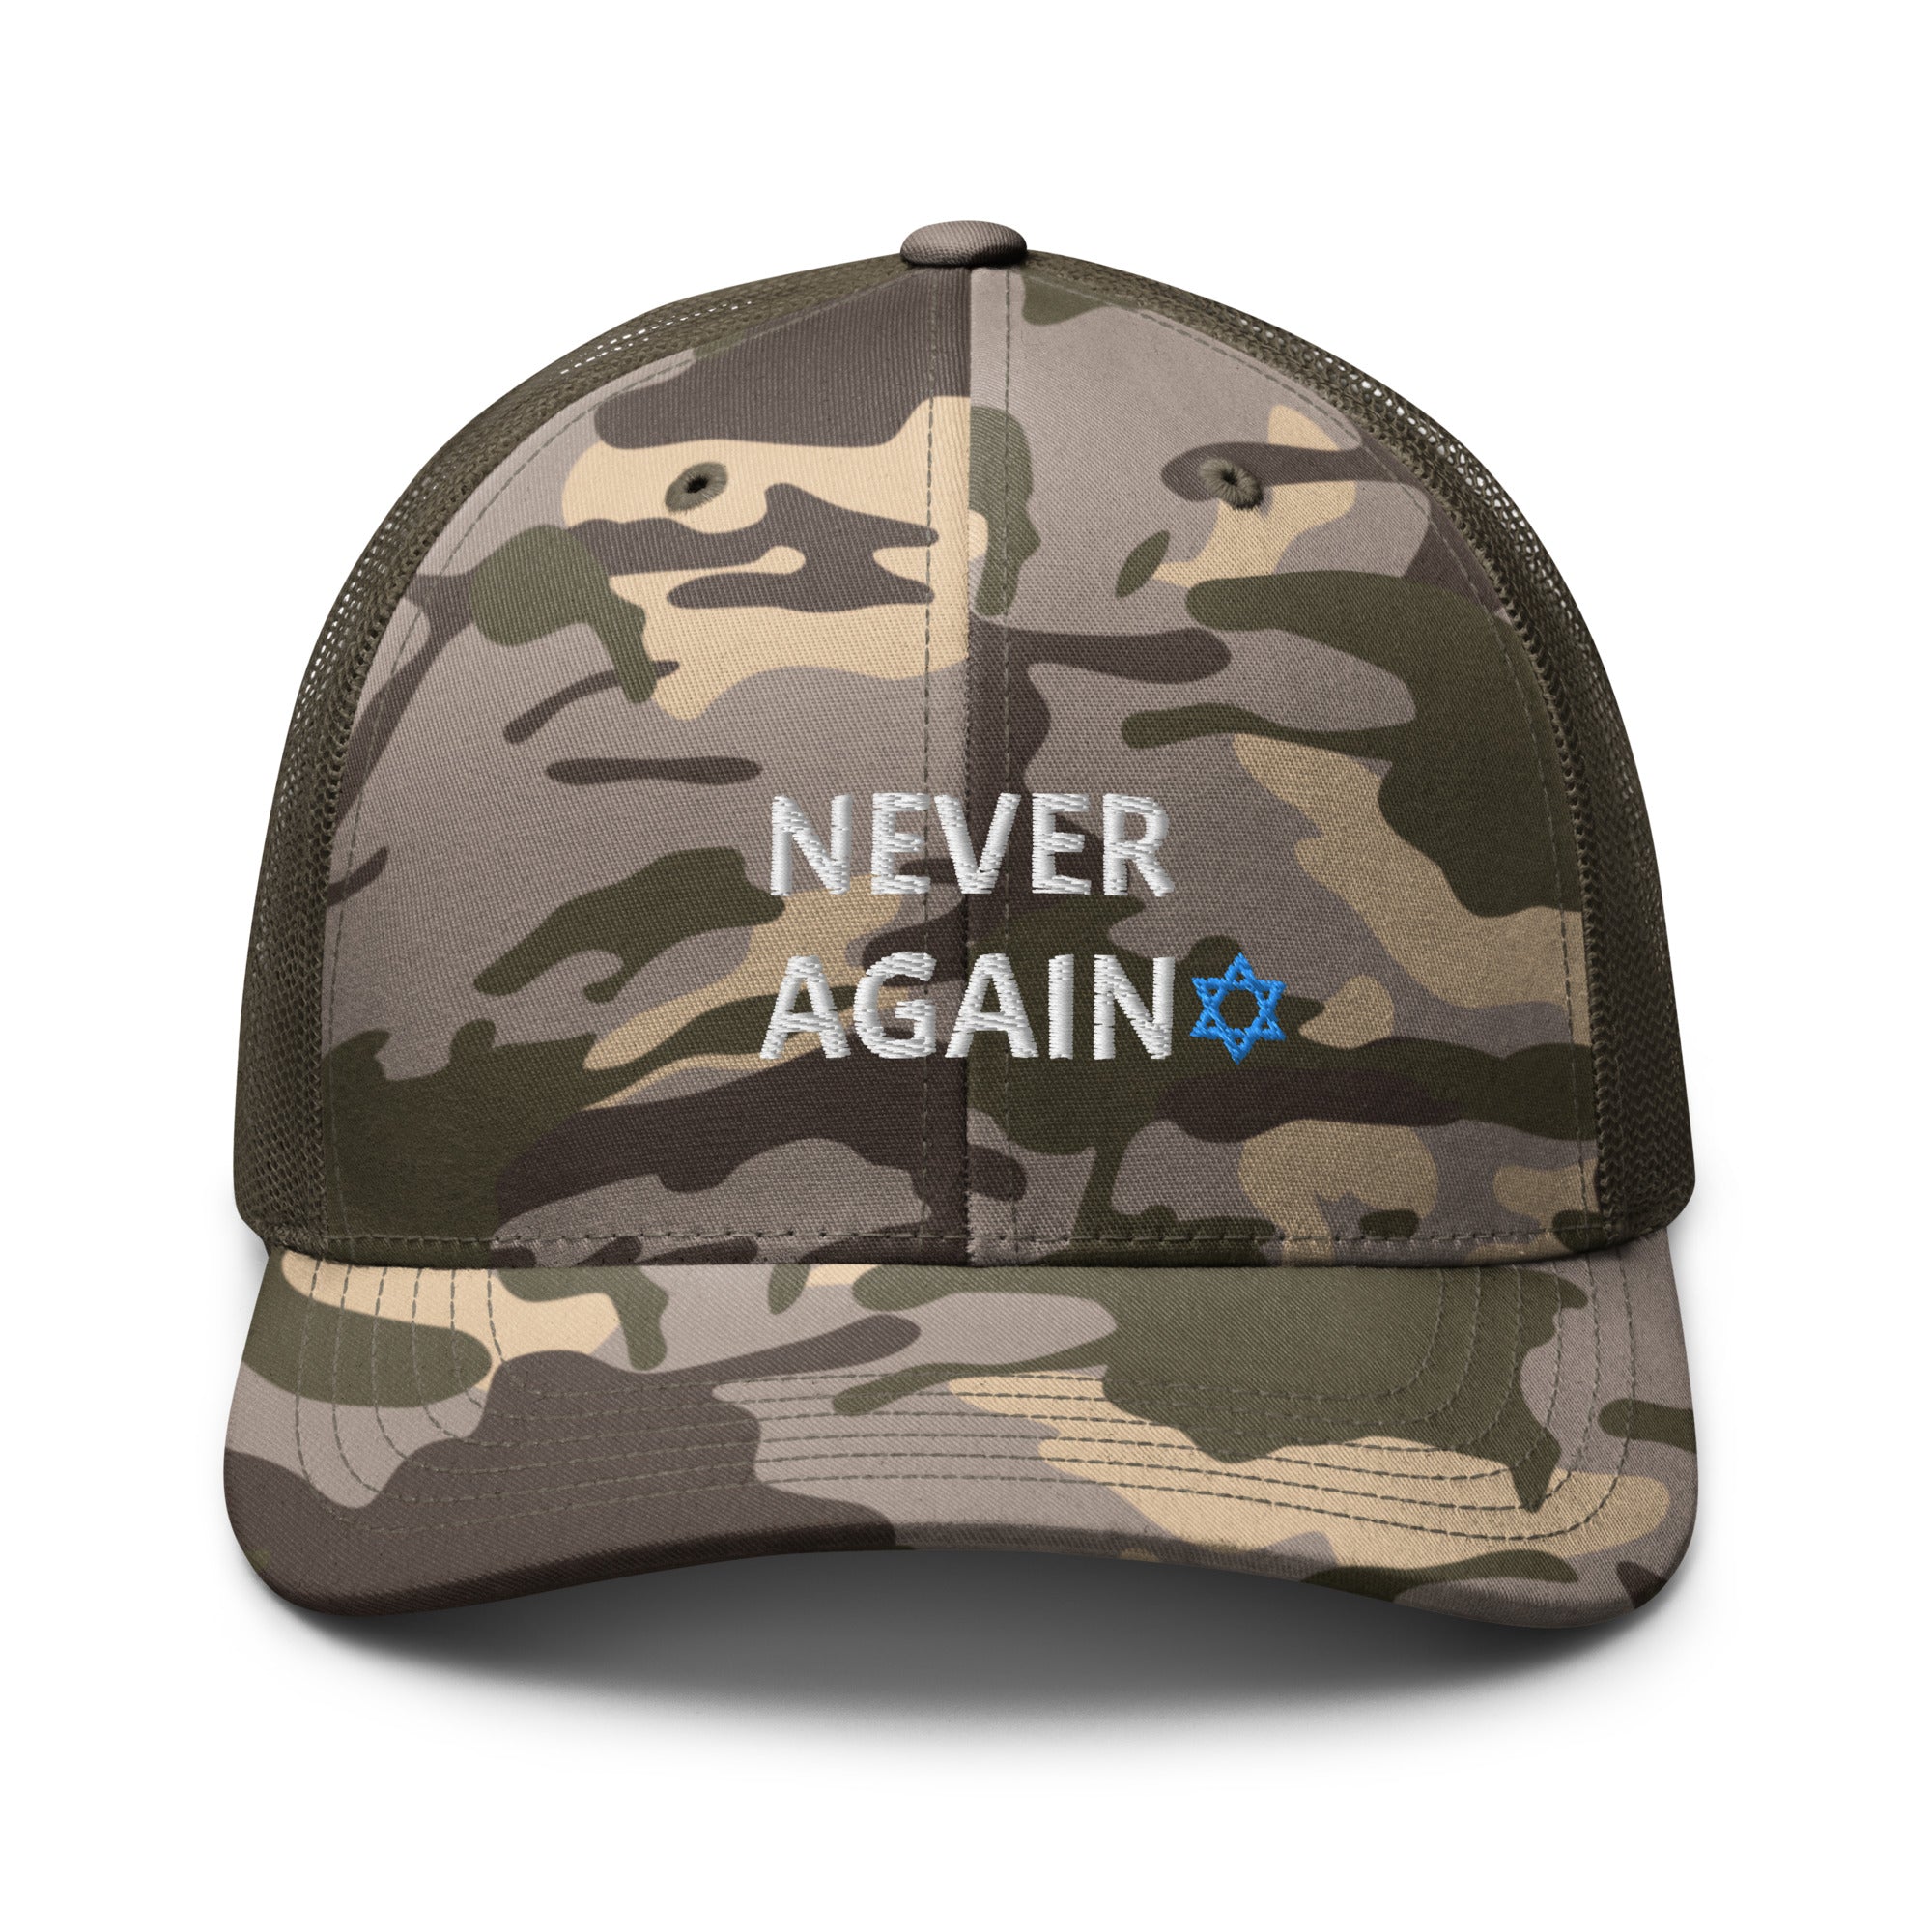 Never Again - Camouflage trucker hat